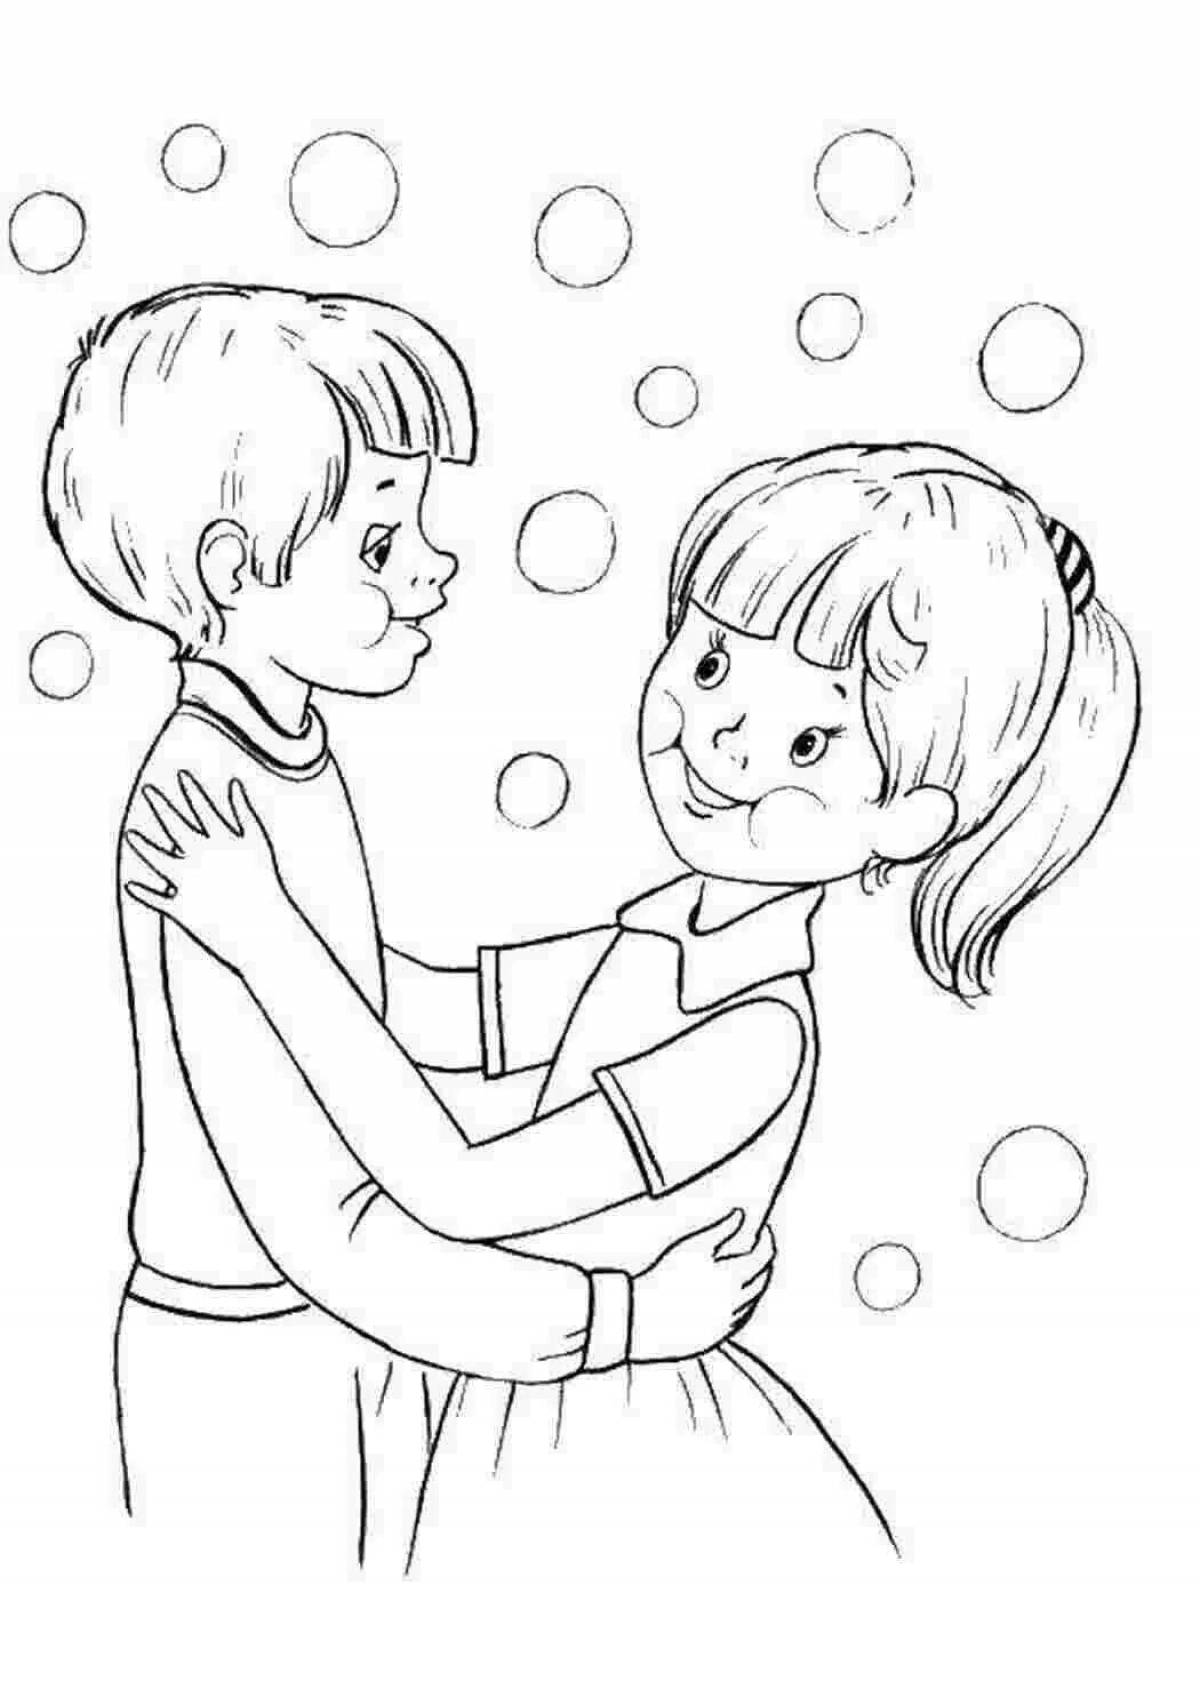 Colorful brother and sister coloring pages